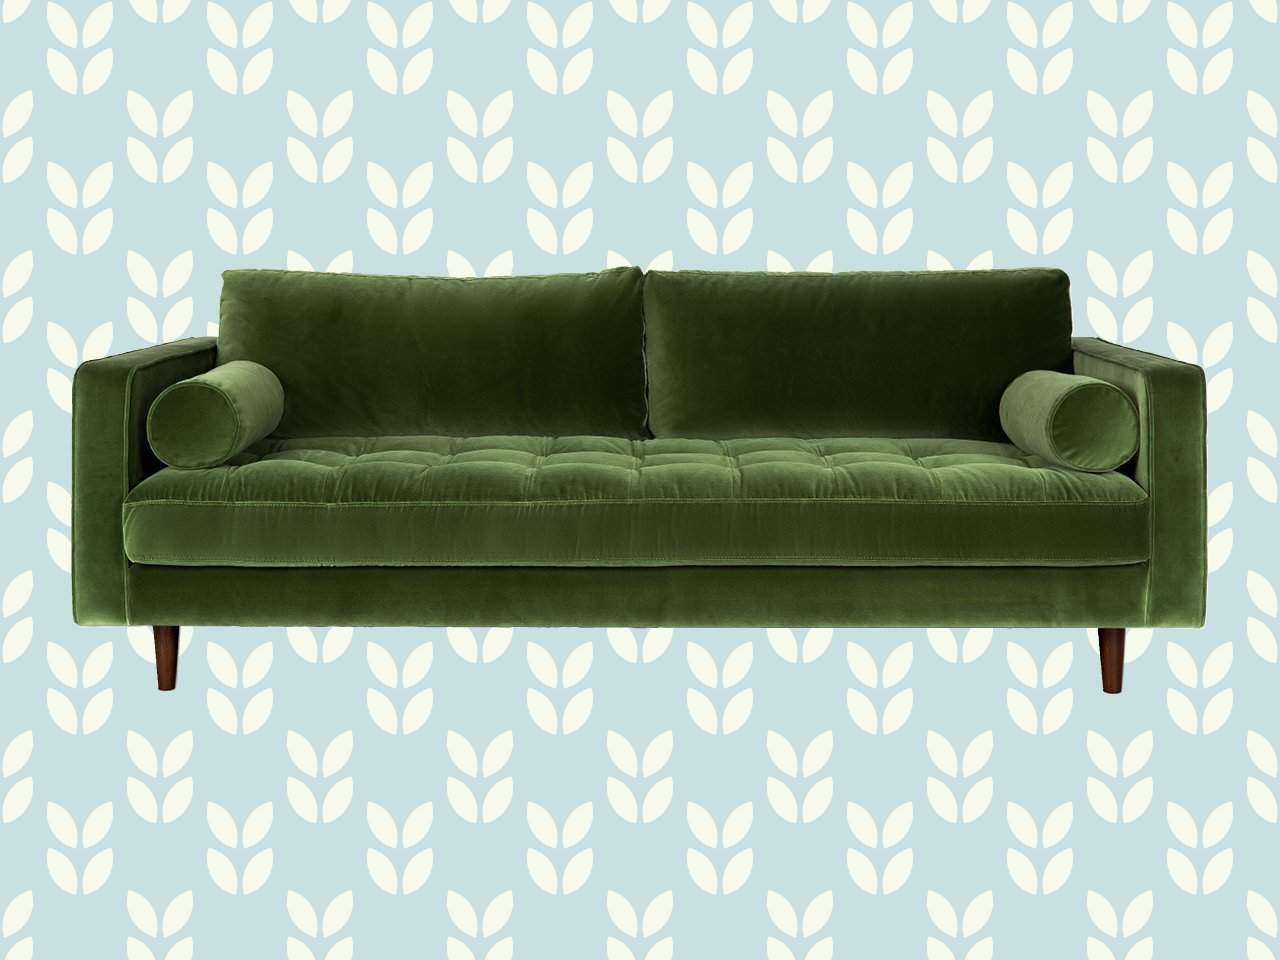 Spend On A Sofa, How Much Does It Cost To Slipcover A Sofa